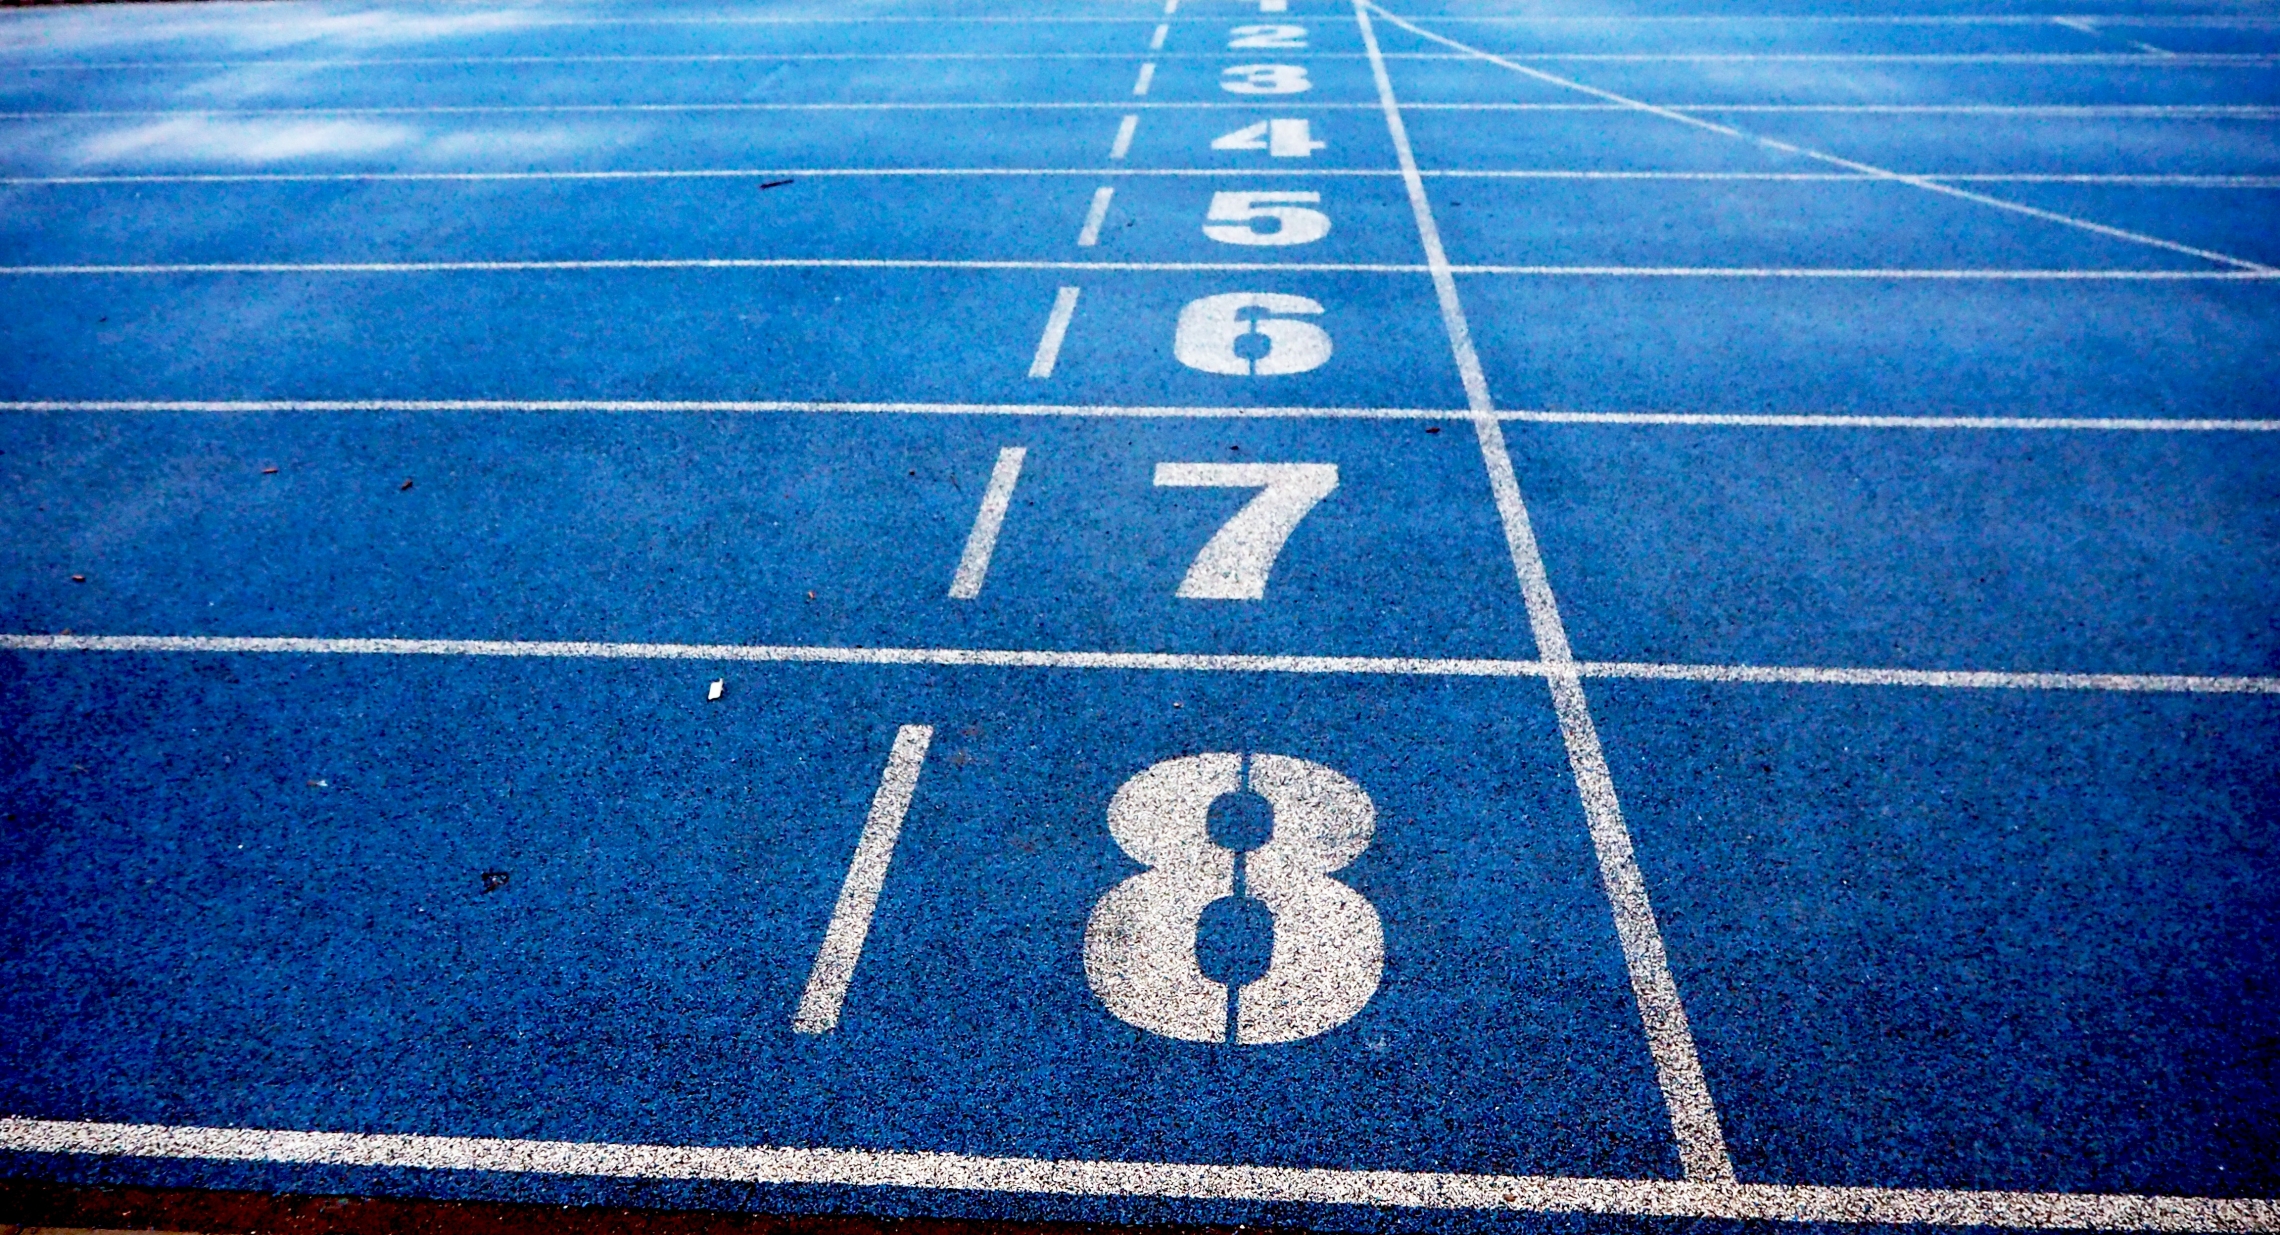 A close up shot of track and field 